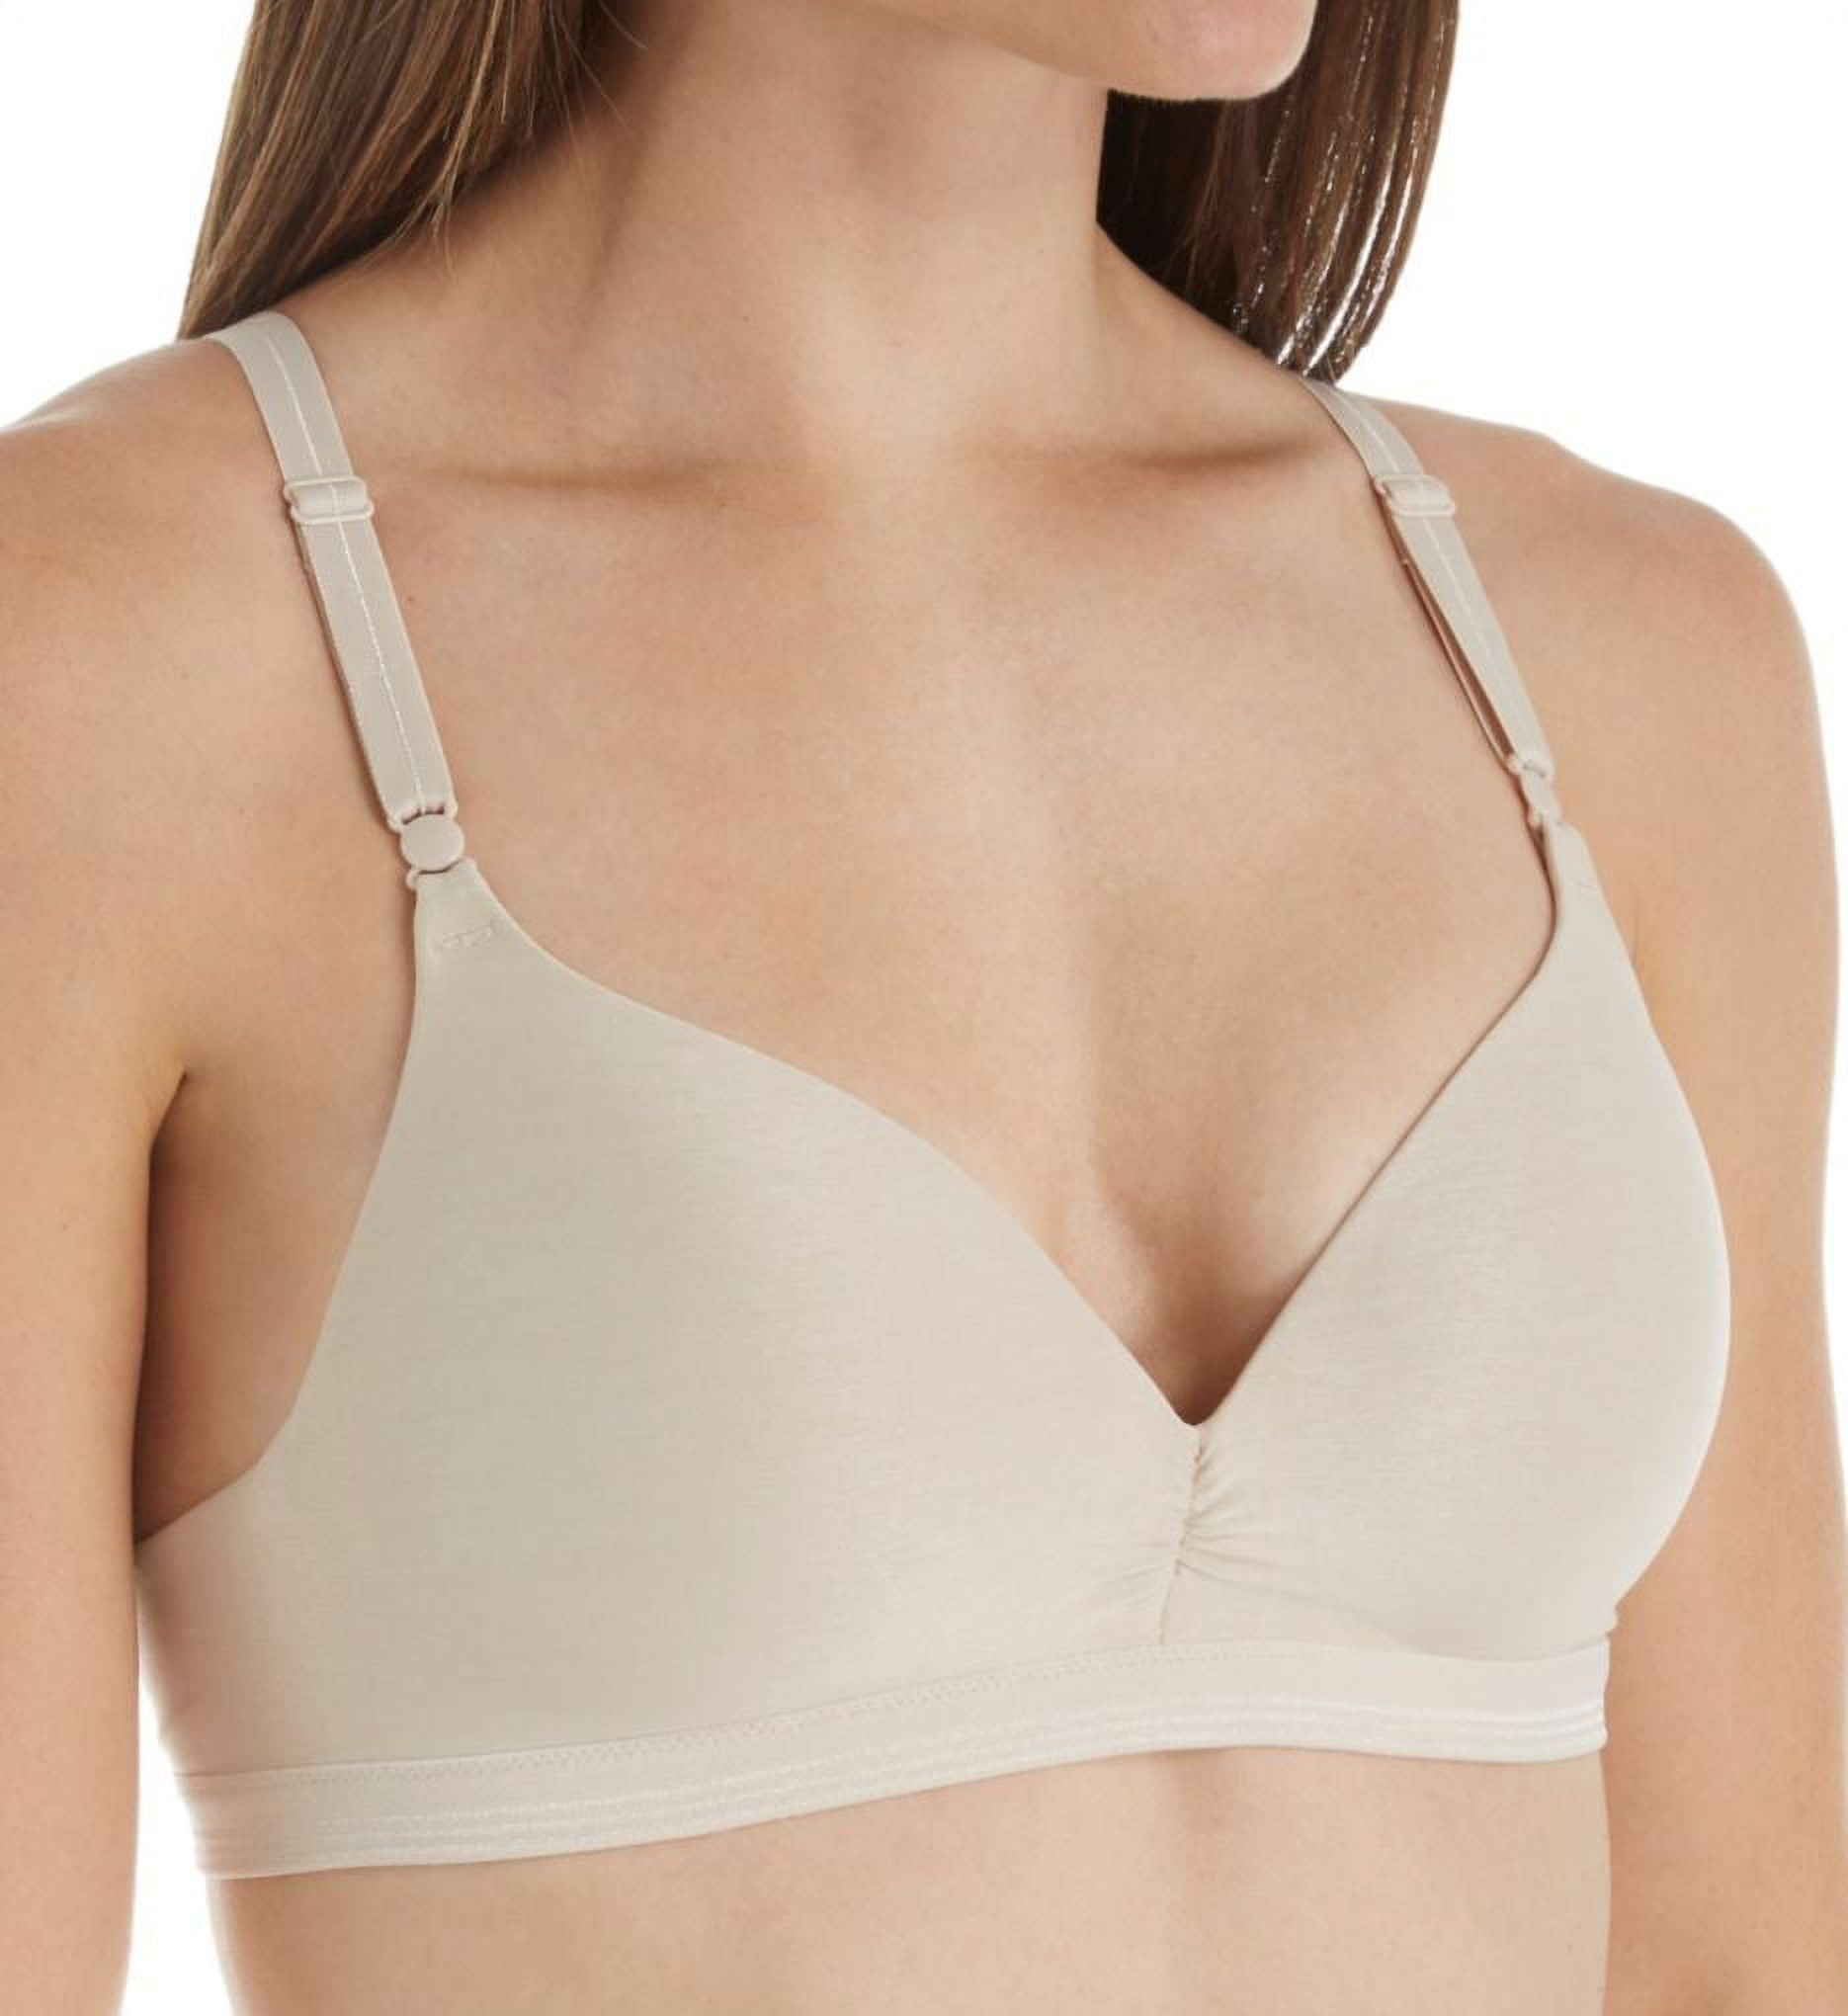 skin tone wired bra for women of colour — ownbrown